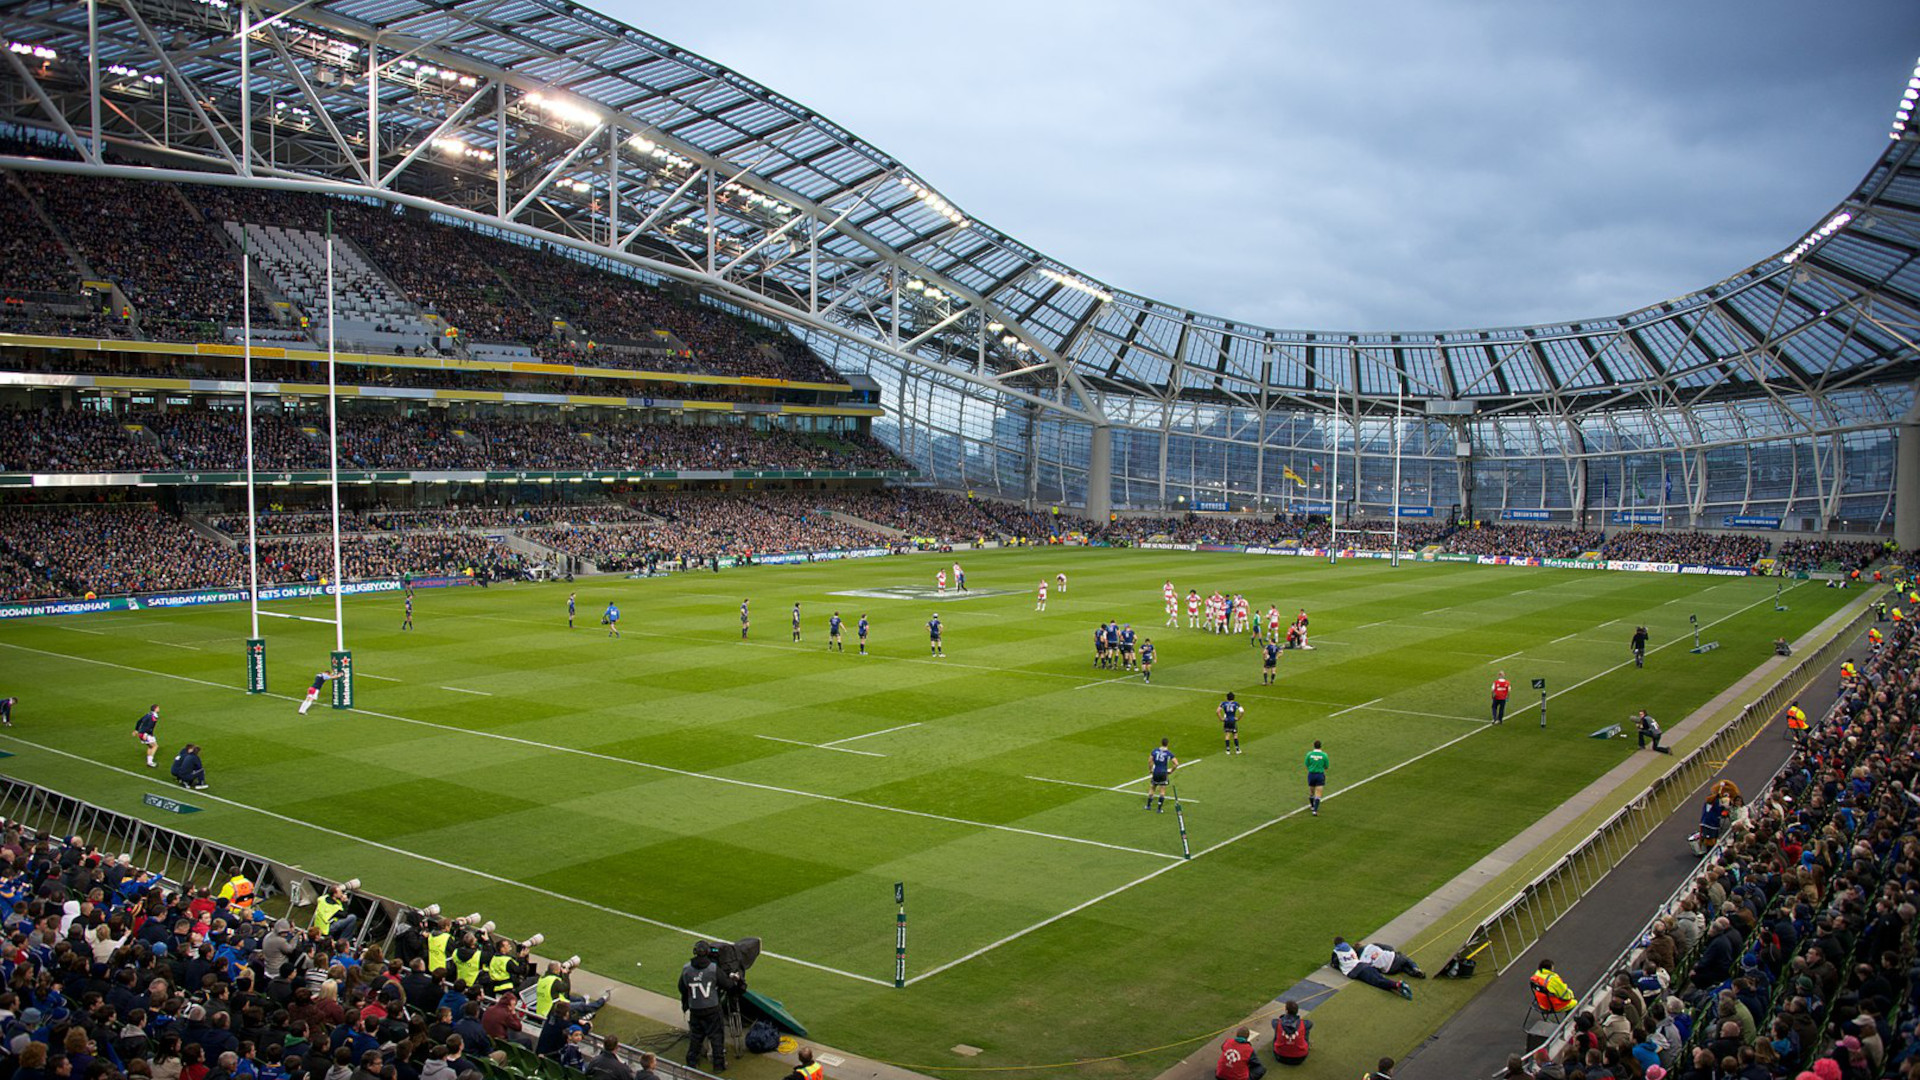 Munster vs Toulouse live stream and how to watch 2021/22 Heineken Cup quarter final online What Hi-Fi?